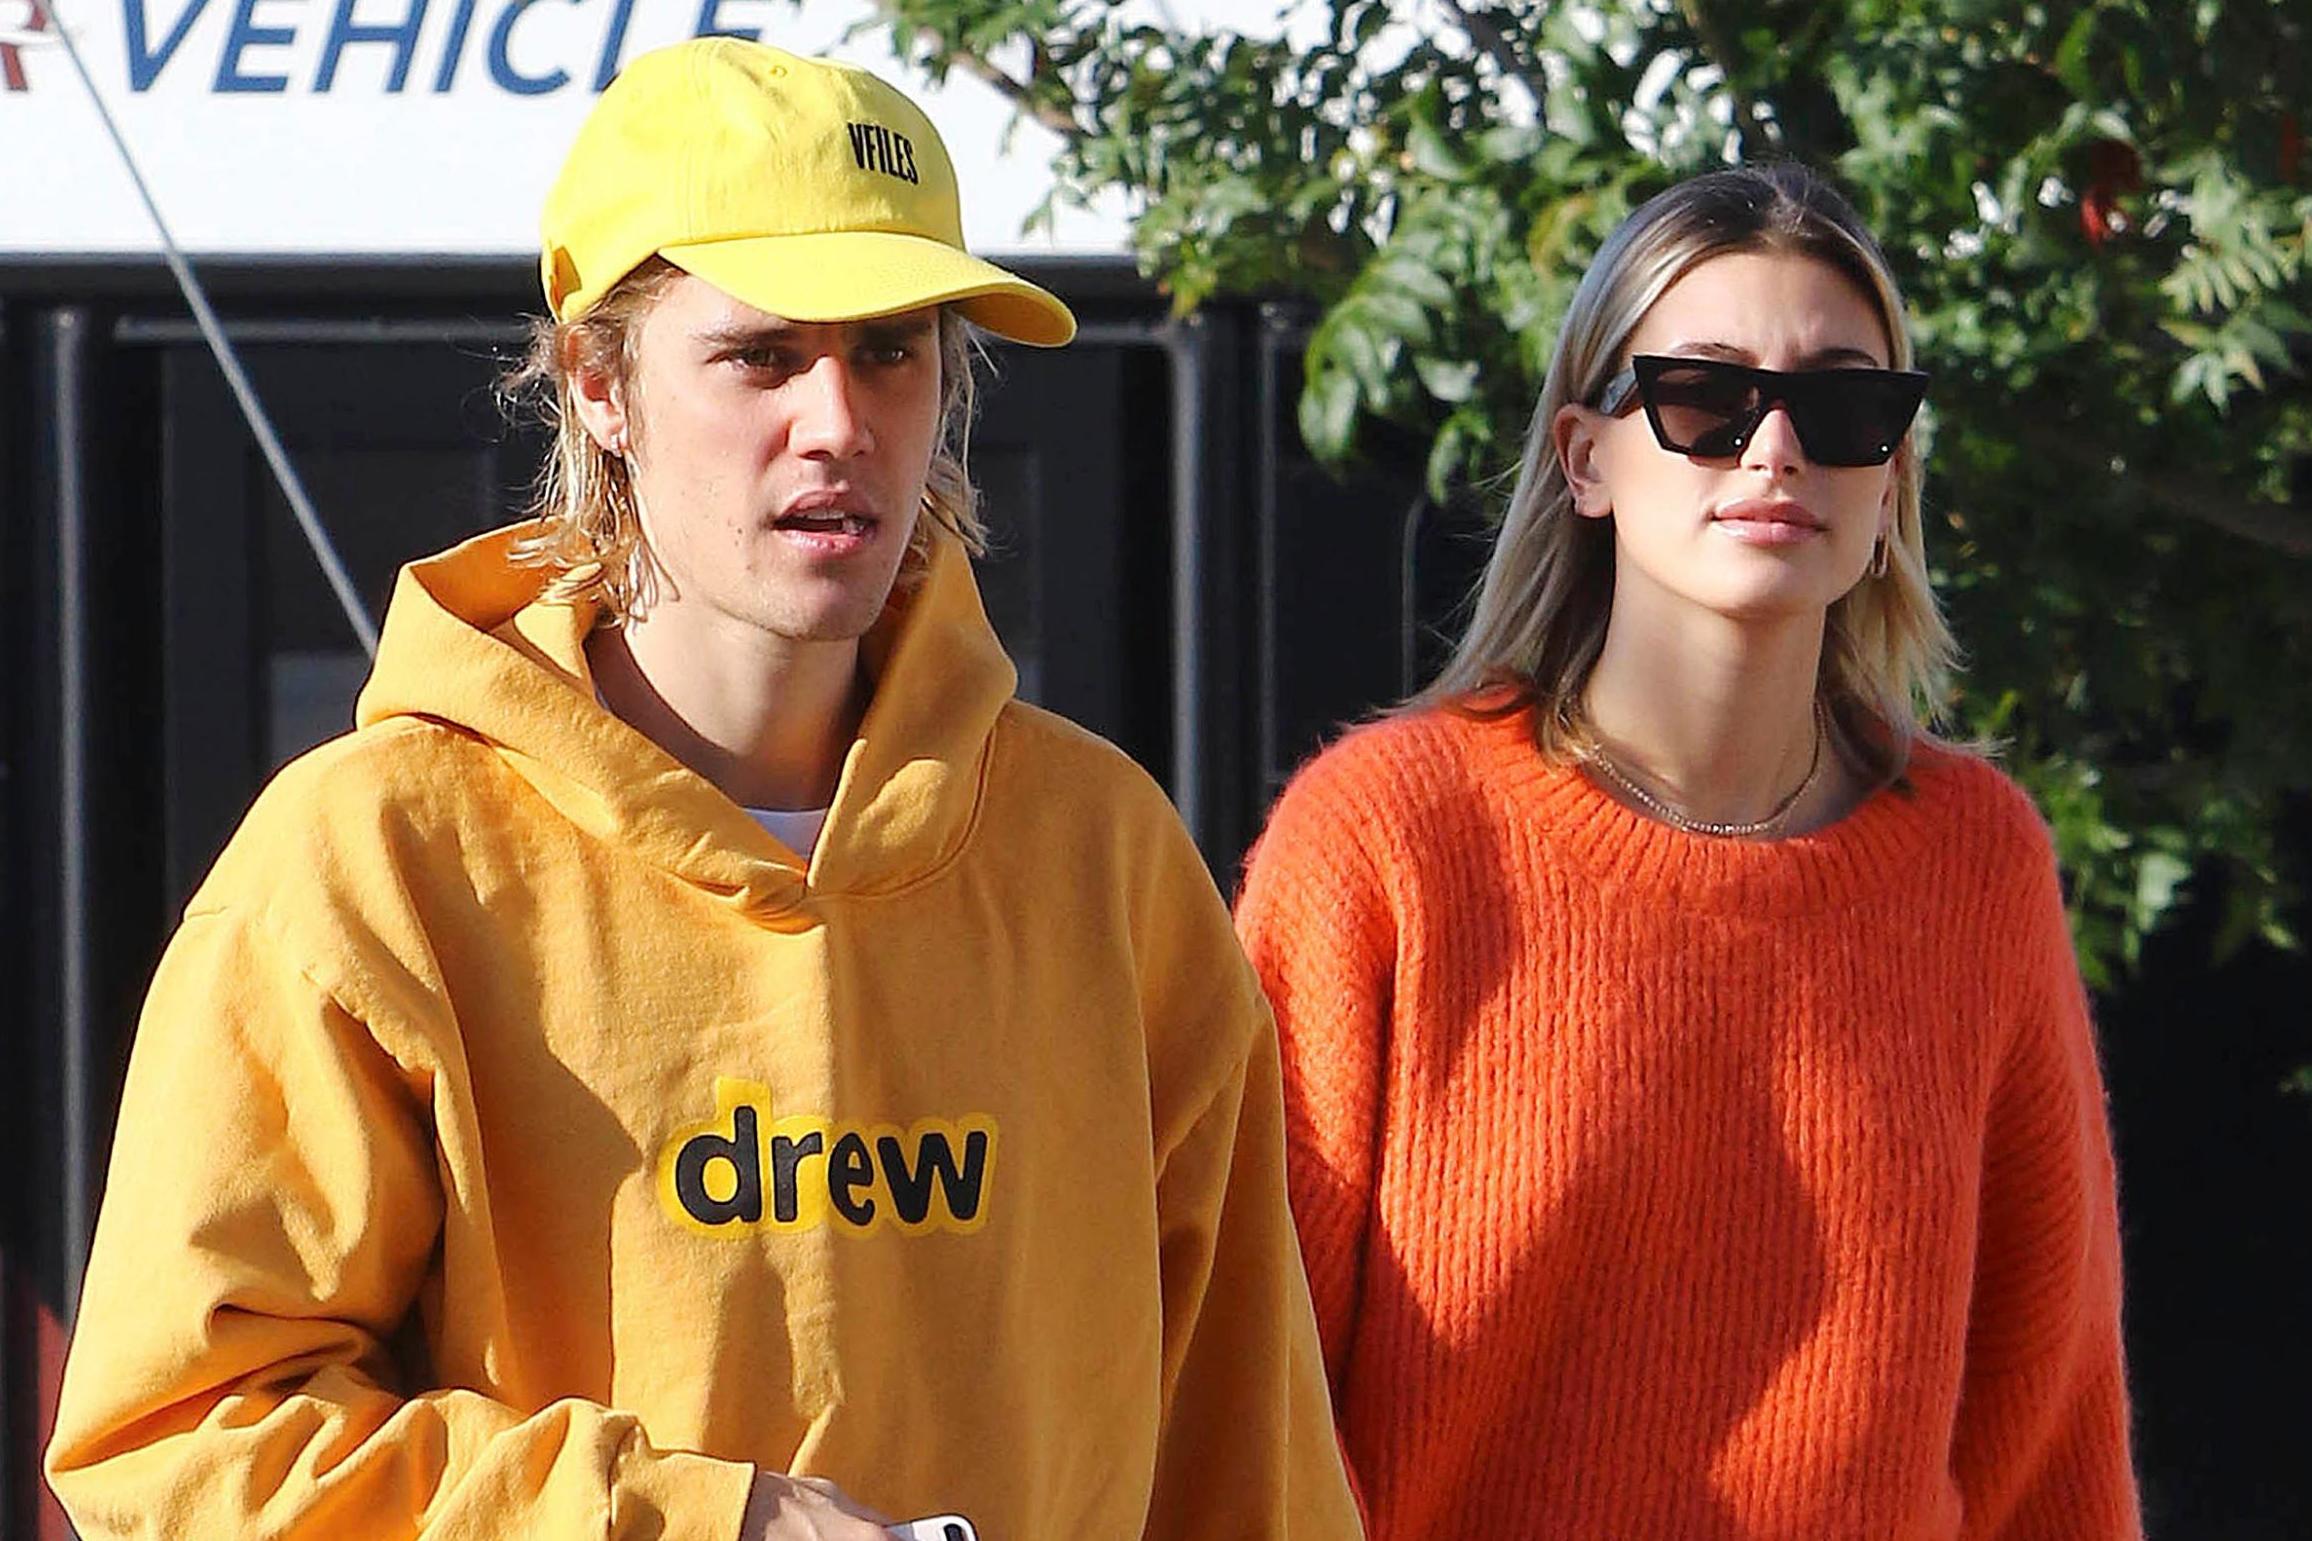 justin bieber s new face tattoo revealed in instagram post - hailey baldwin just made her marriage to justin bieber instagram